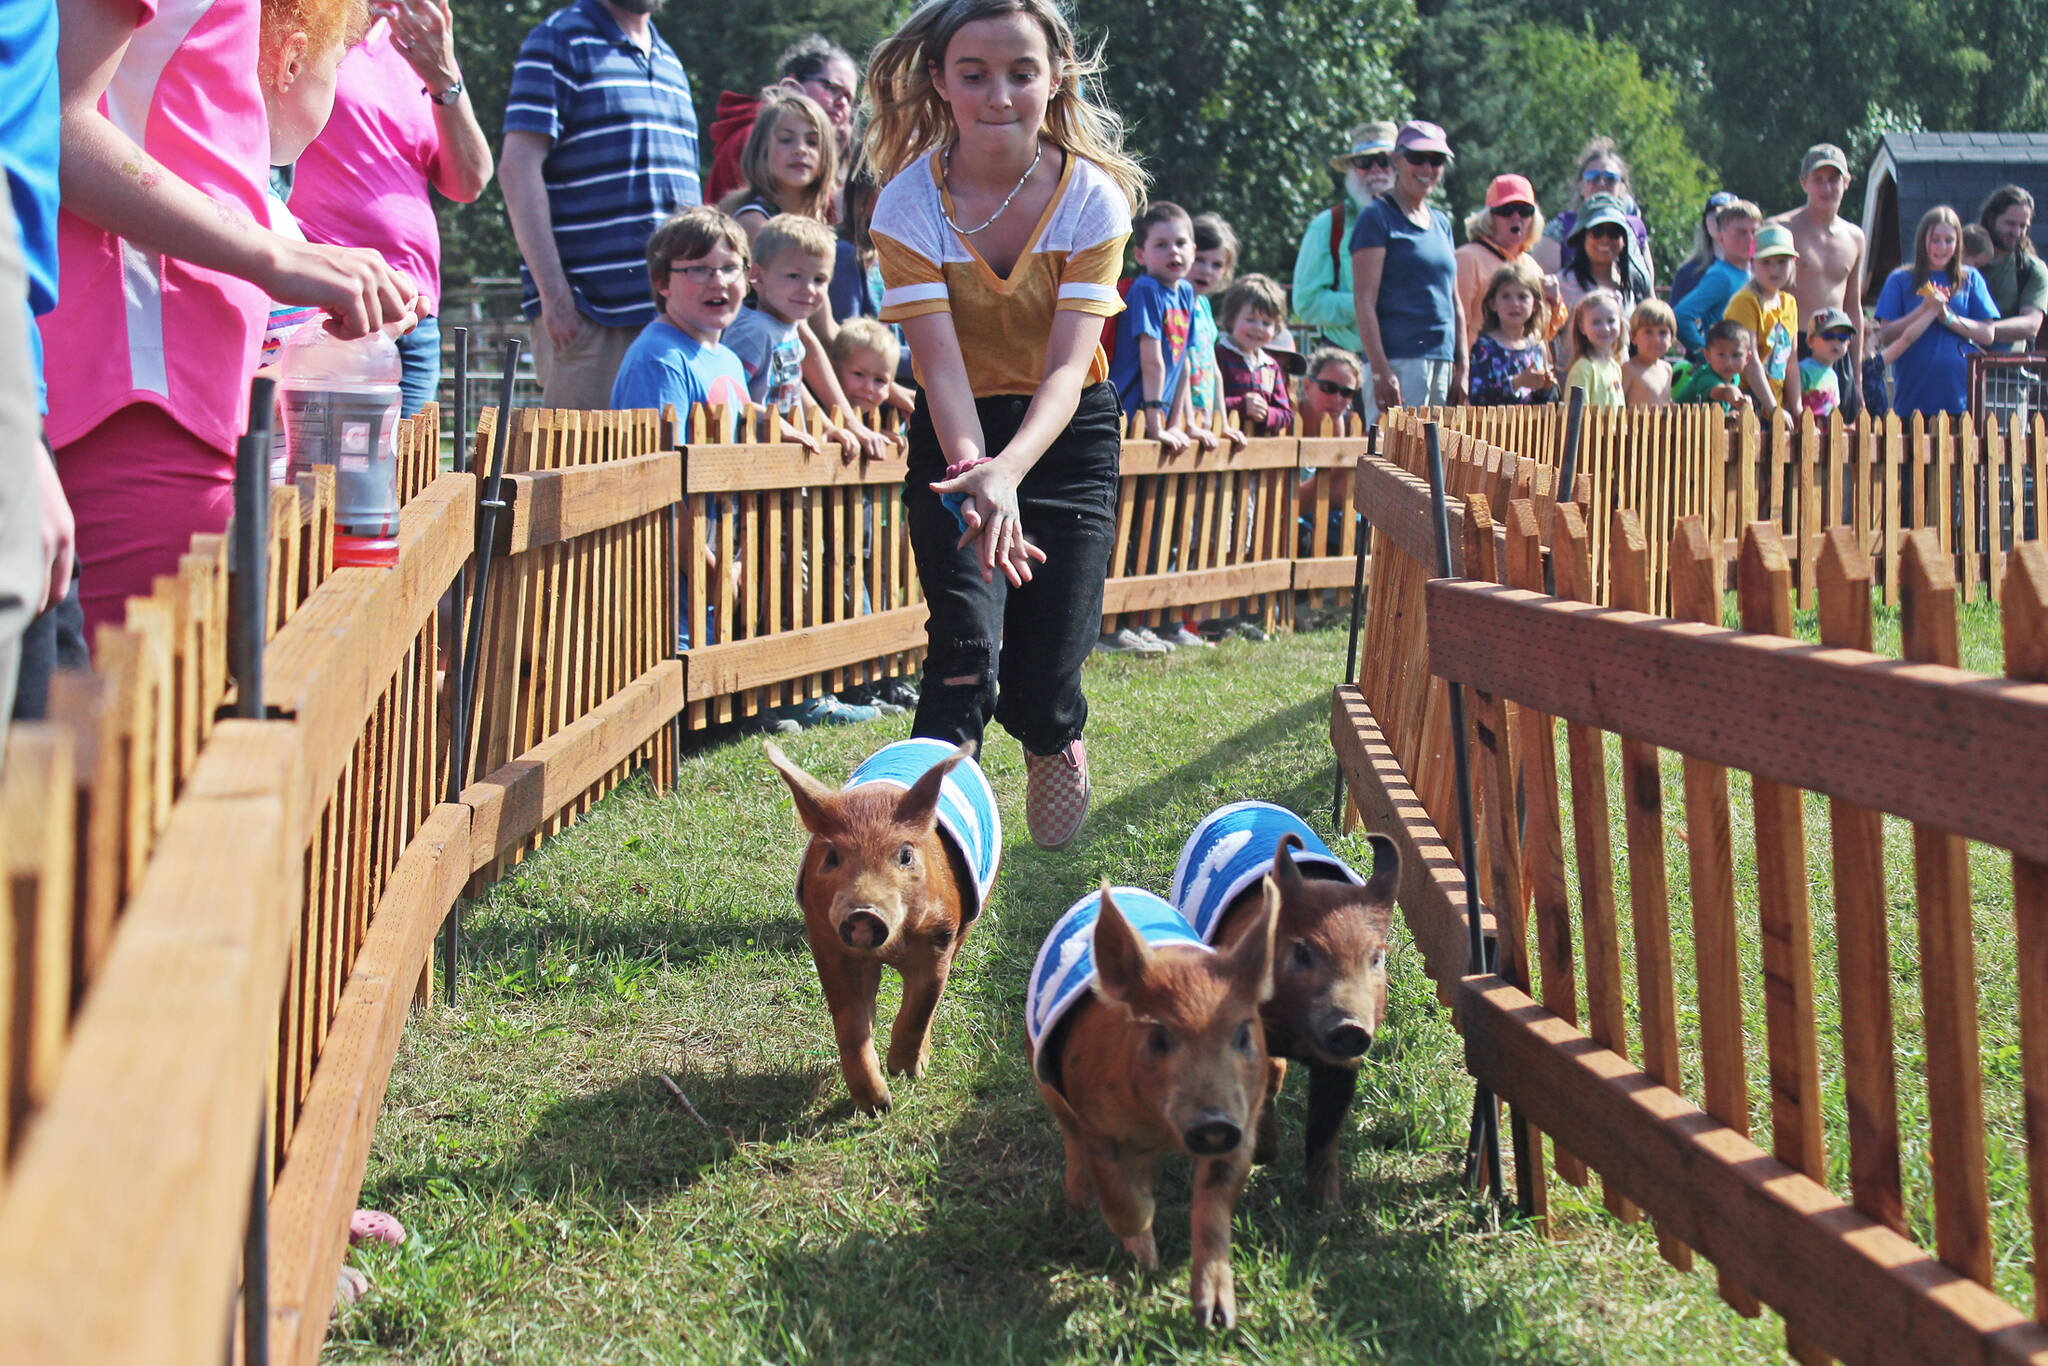 A young volunteer chases three piglets named Mary Hamkins, Petunia and Sir Oinks-a-lot through the race Kenai Peninsula Fairgrounds during the pig races on Friday, Aug. 16, 2019, in Ninilchik, Alaska. Spectators place bets on their favorite swine to win and the proceeds go to support the fair. (Photo by Megan Pacer/Homer News)